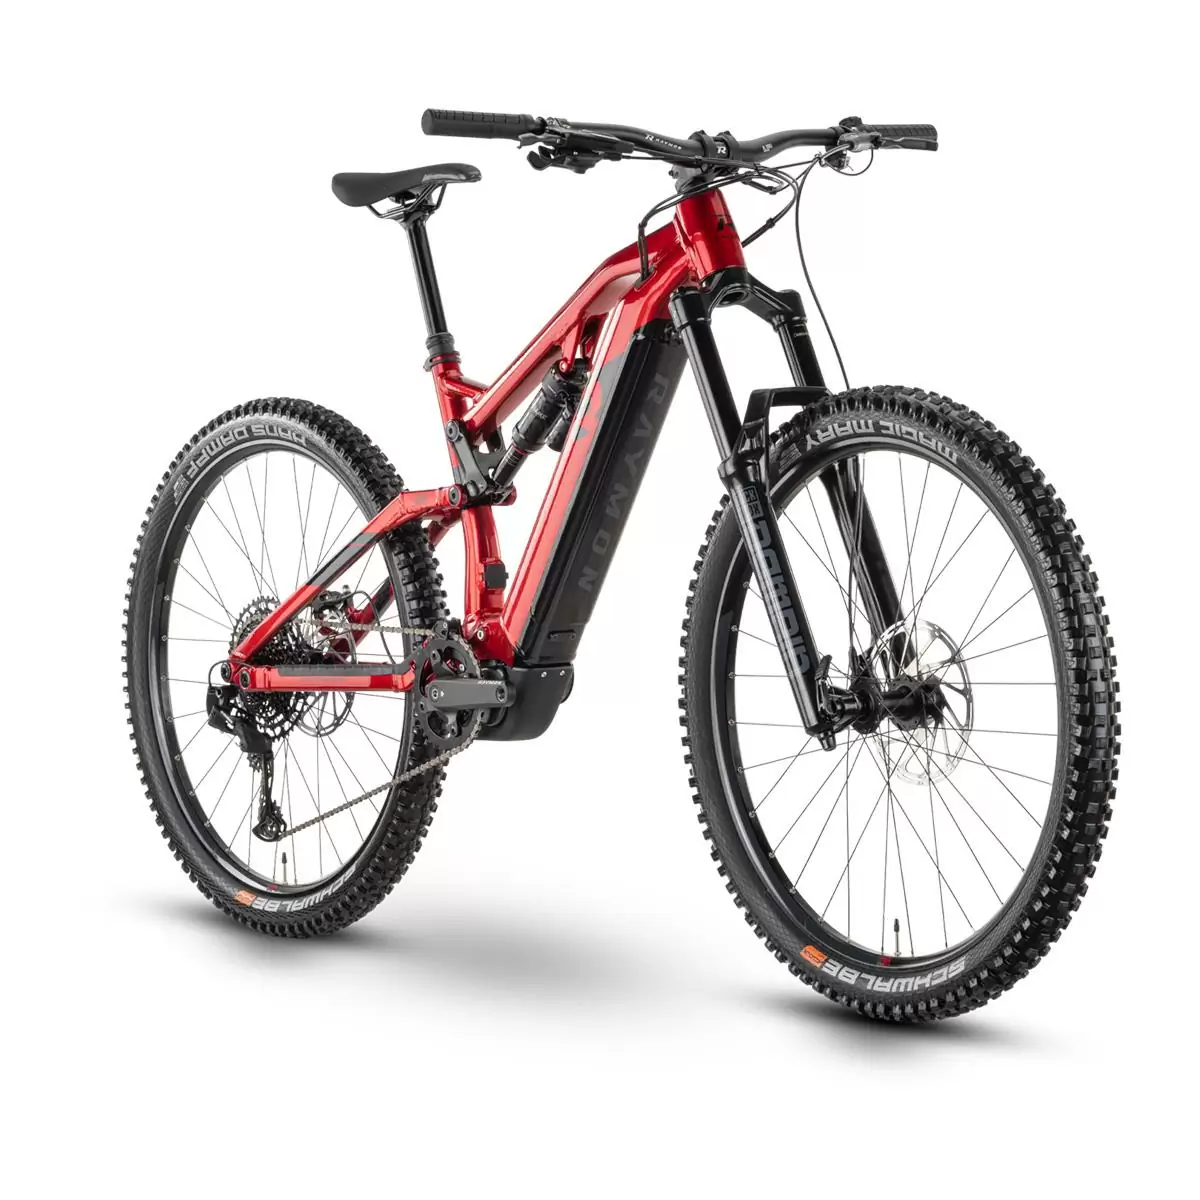 TrailRay 160E 10.0 29'' 170mm 12s 720Wh Yamaha PW-X3 Red/Black Size S - image